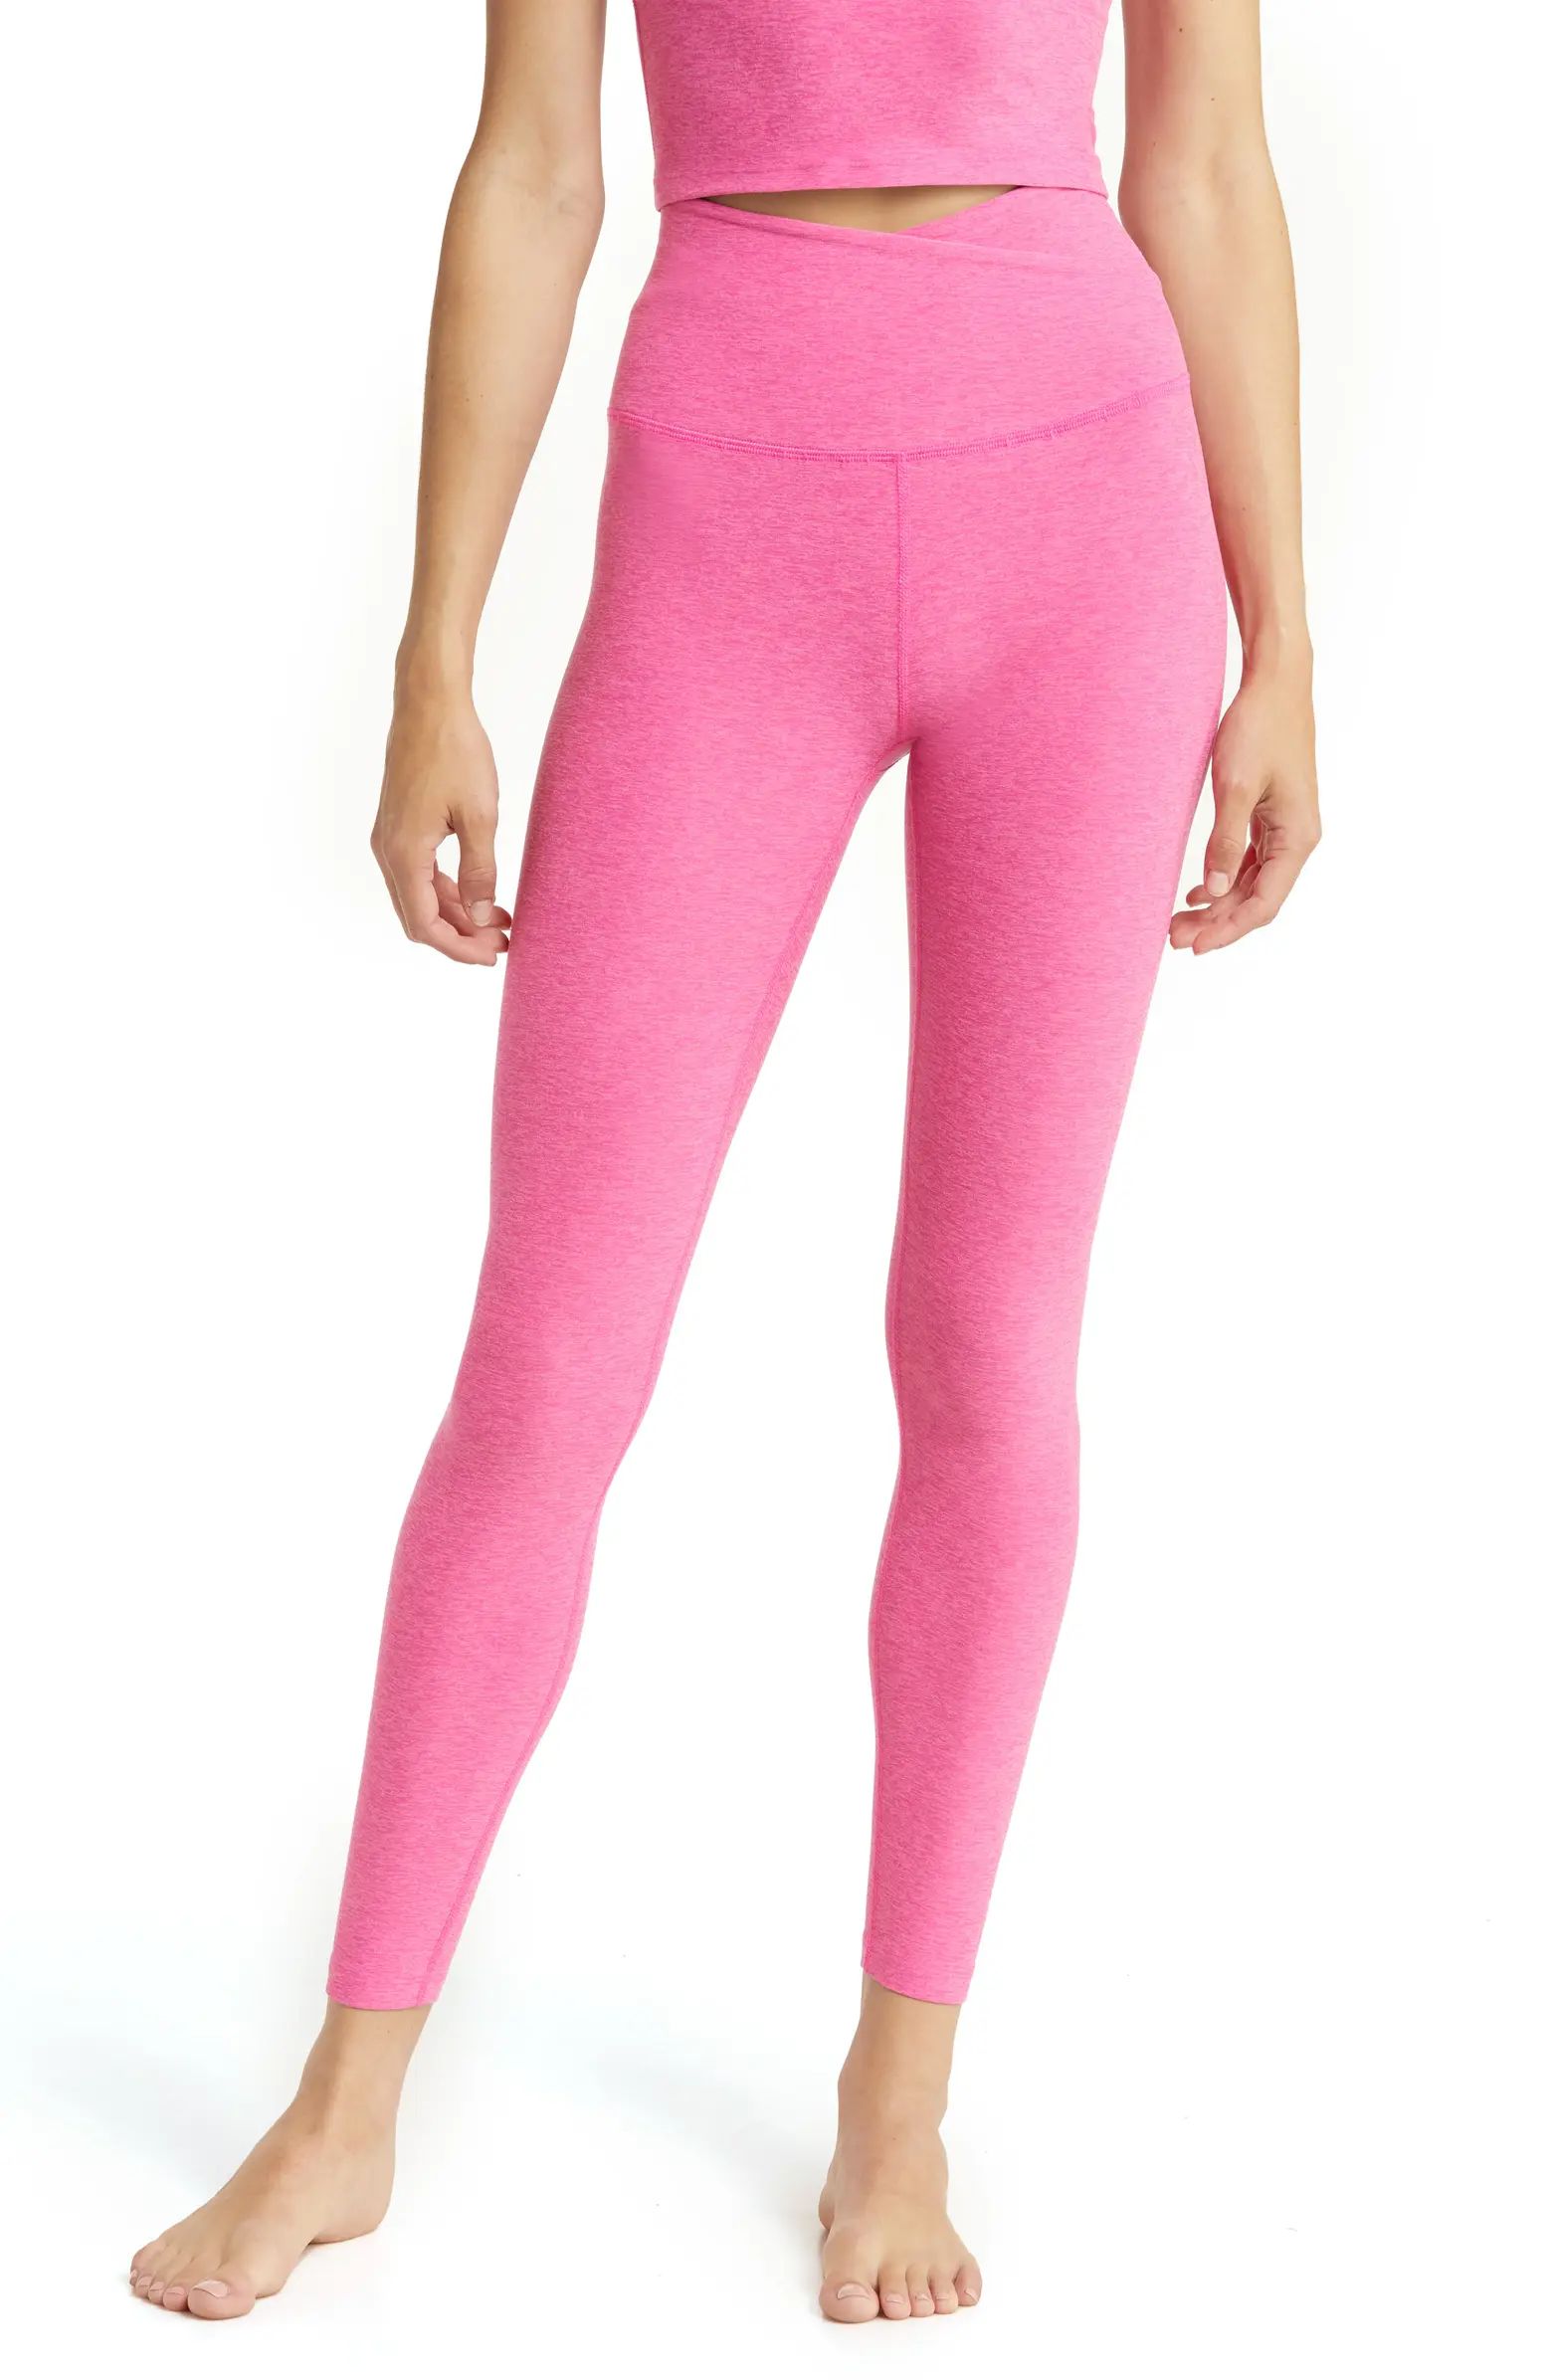 At Your Leisure High Waist Leggings | Nordstrom